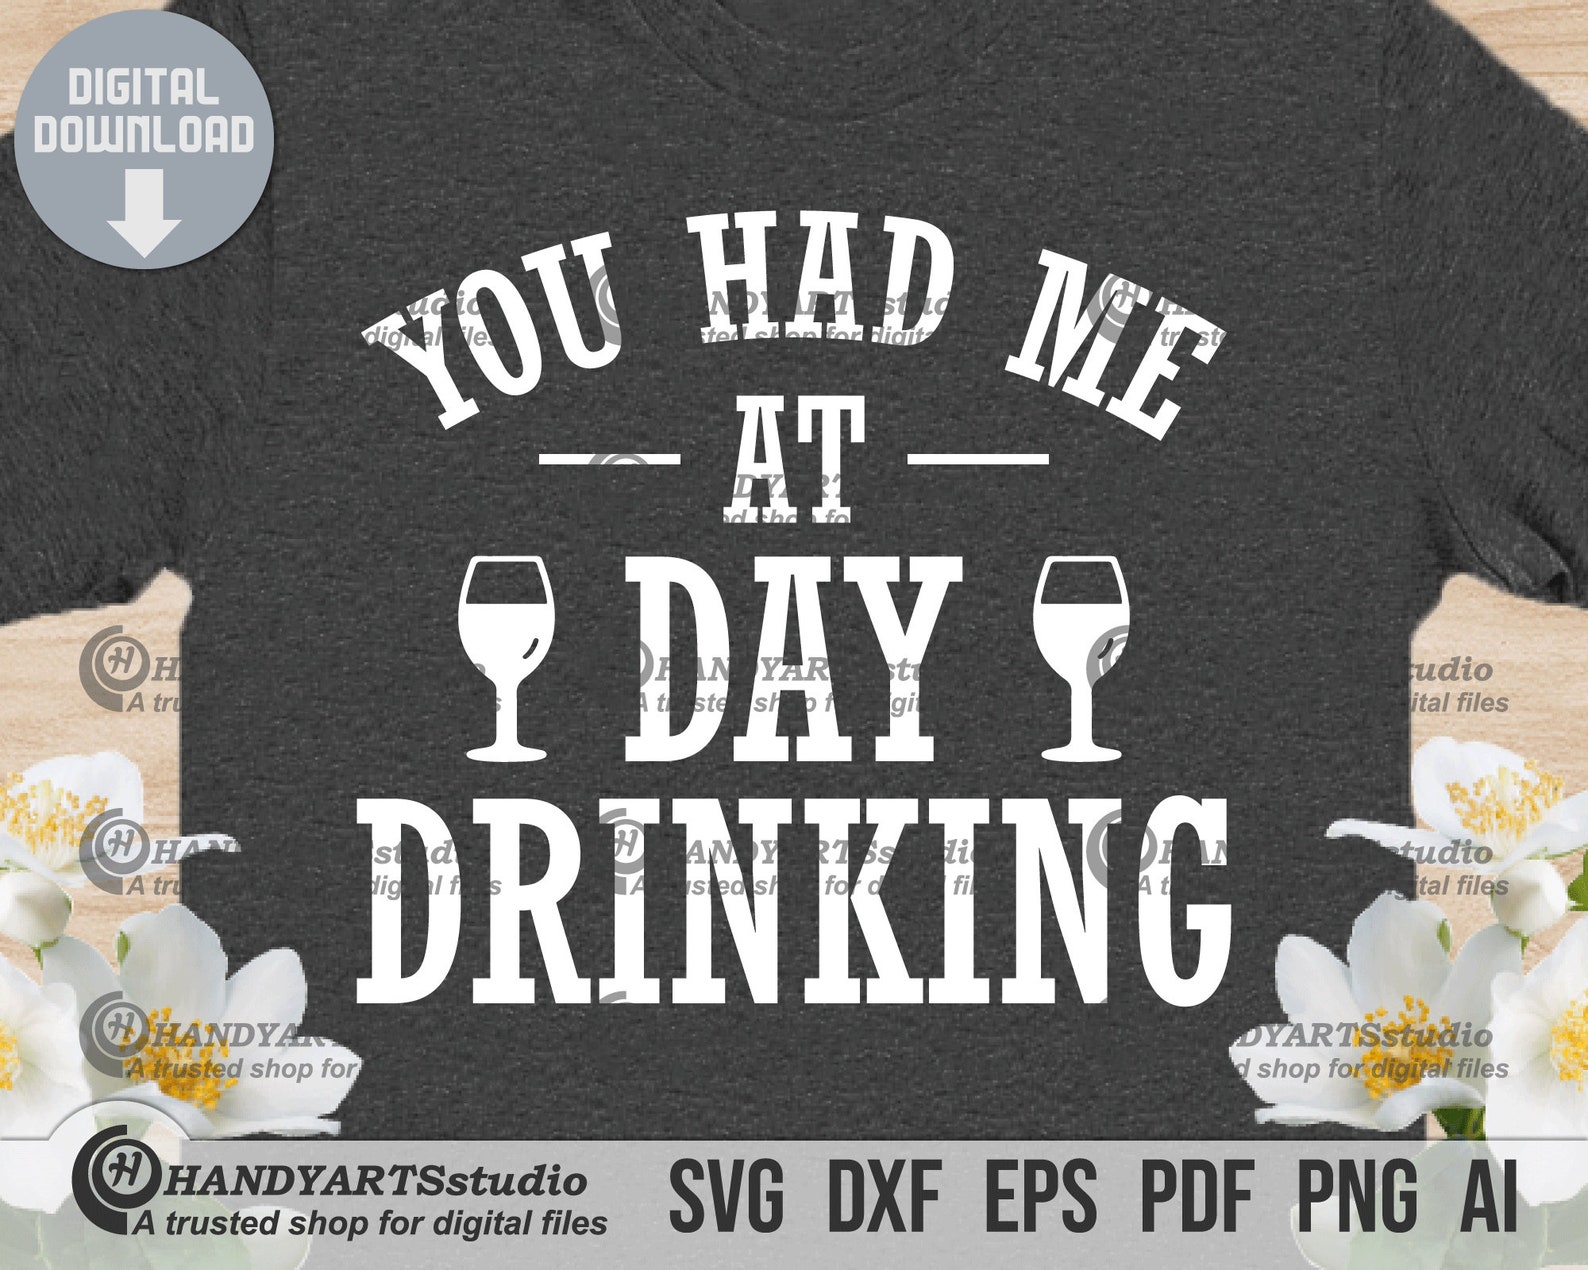 You Had Me At Day Drinking Svg Cutting File For Cricut And Etsy